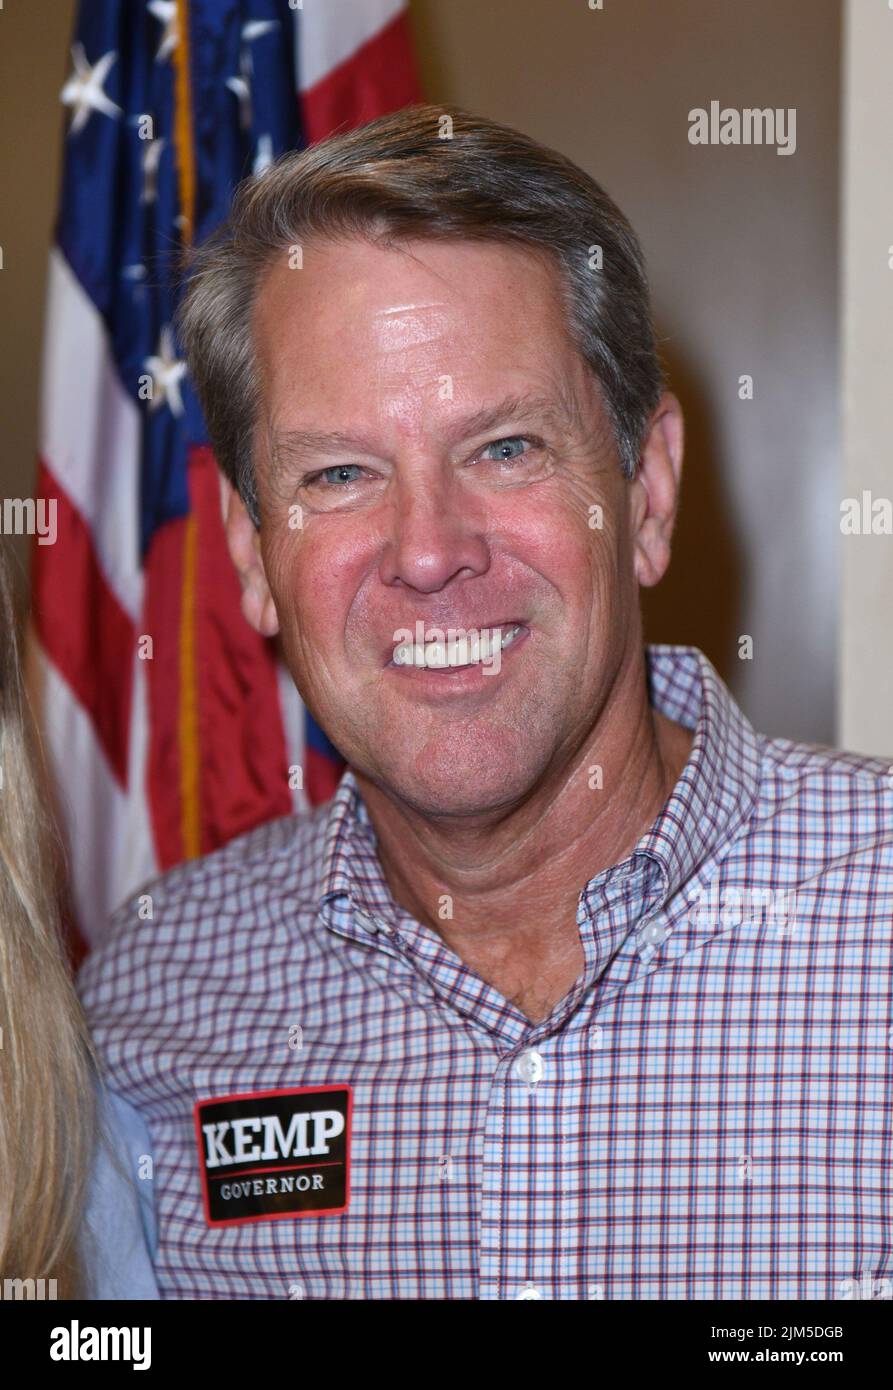 Blairsville, GA, USA. 4th Aug, 2022. Brian Kemp at a public appearance for Florida Governor Brian Kemp Meet and Greet, Blairsville Community Center, Blairsville, GA August 4, 2022. Credit: Derek Storm/Everett Collection/Alamy Live News Stock Photo